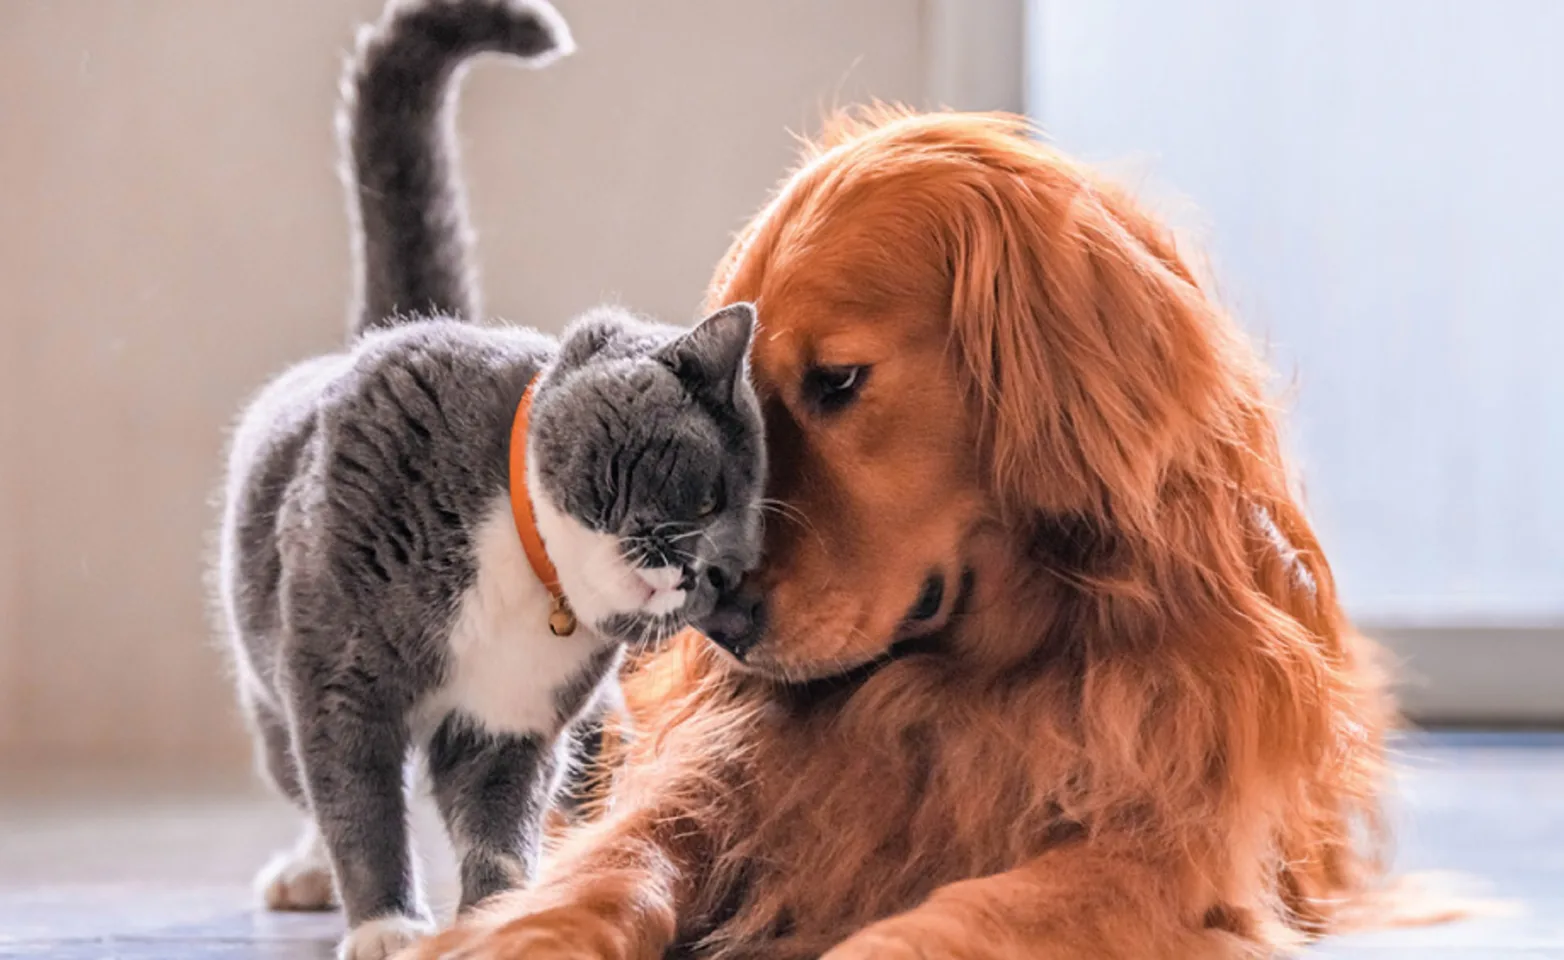 Golden retriever and cat face to face.